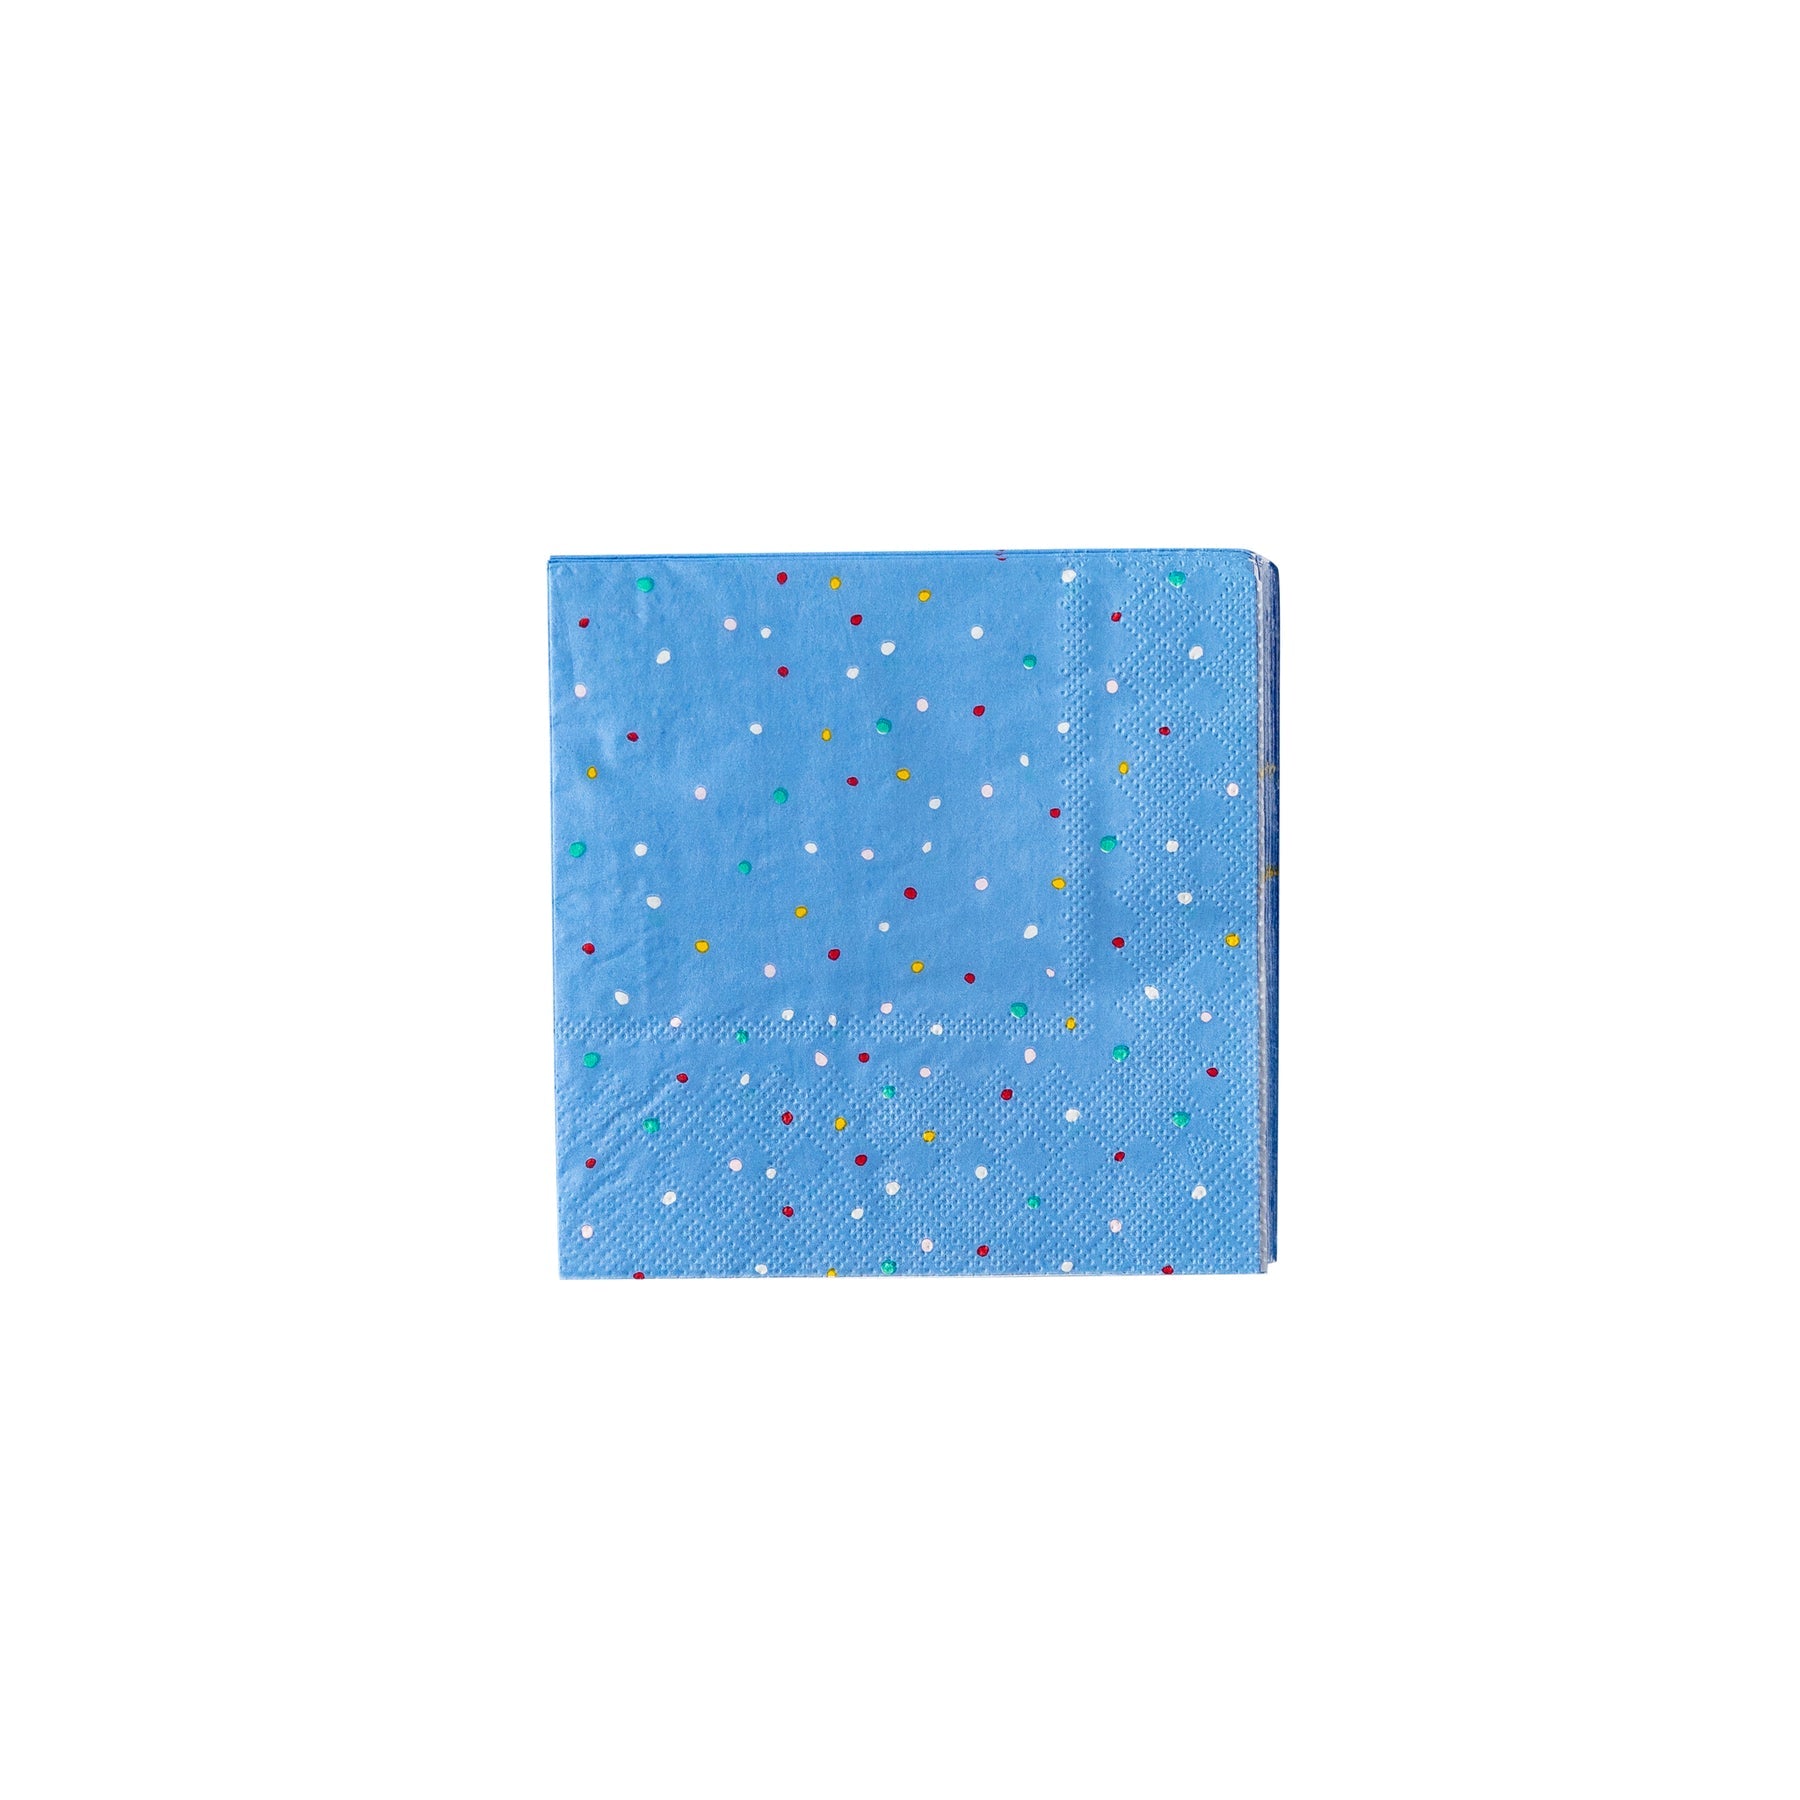 Blue speckled out party cocktail napkins sold at ALittleConfetti, by My Minds Eye